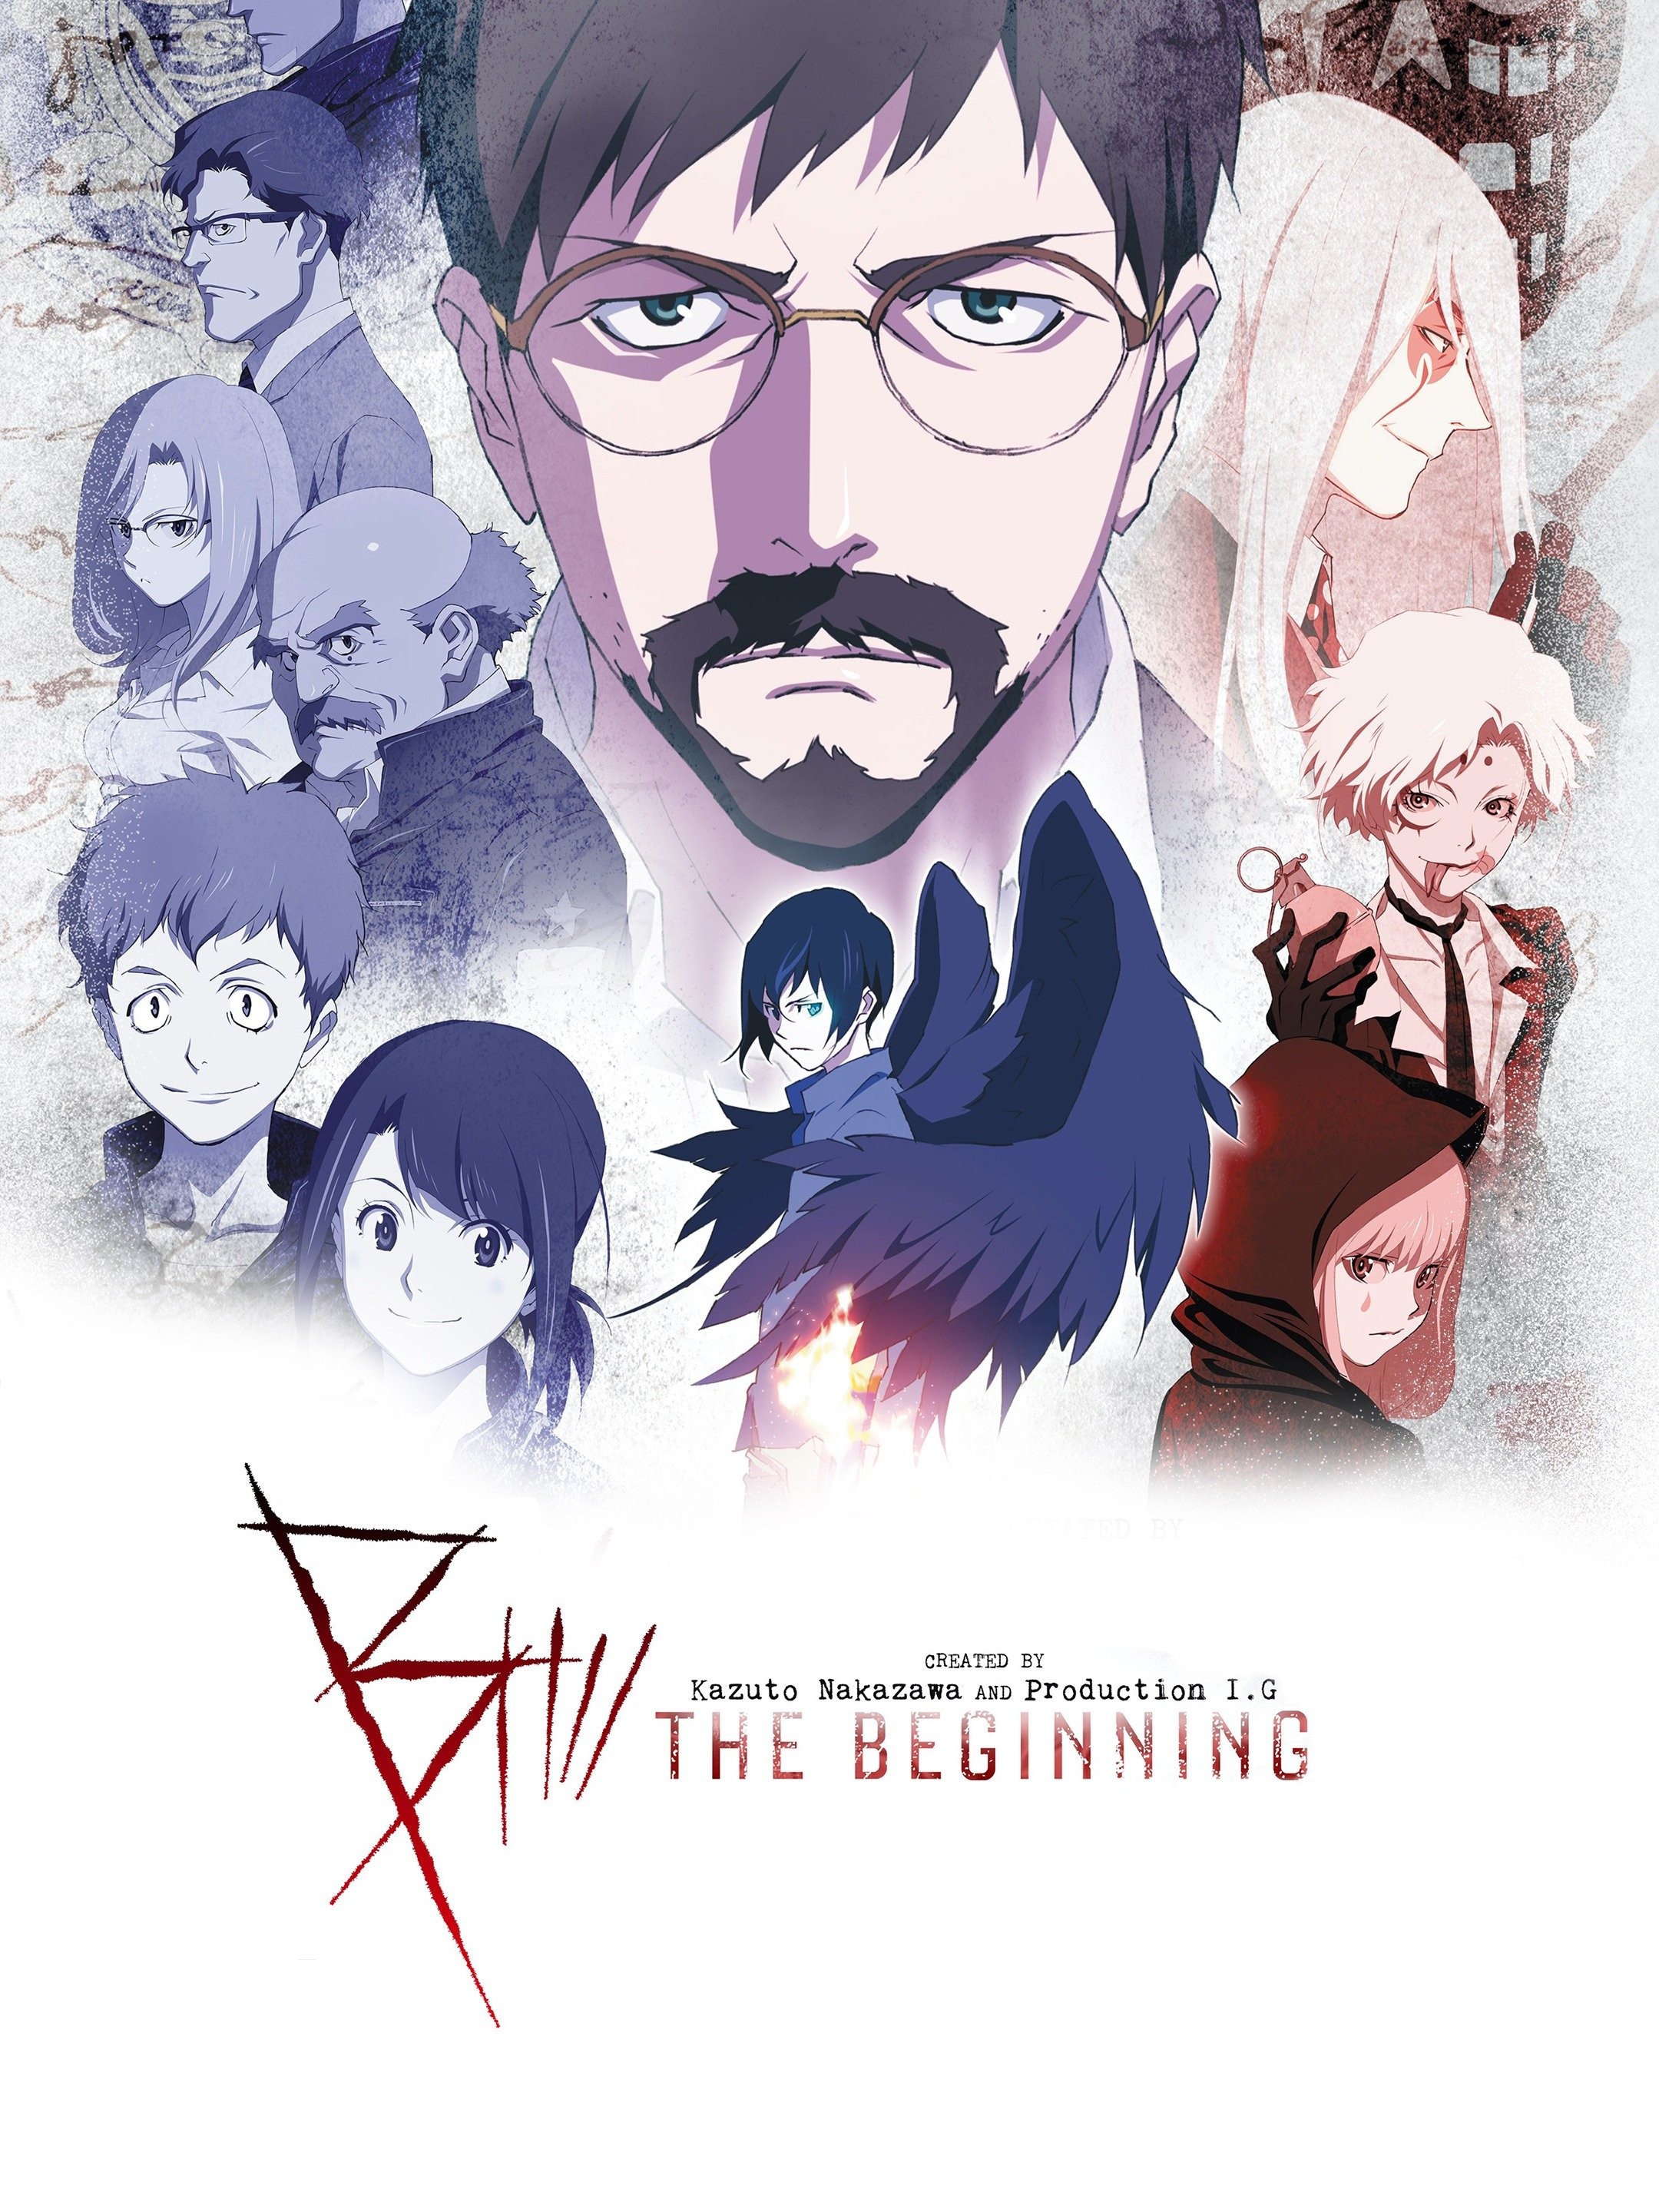 B: The Beginning Succession - Rotten Tomatoes